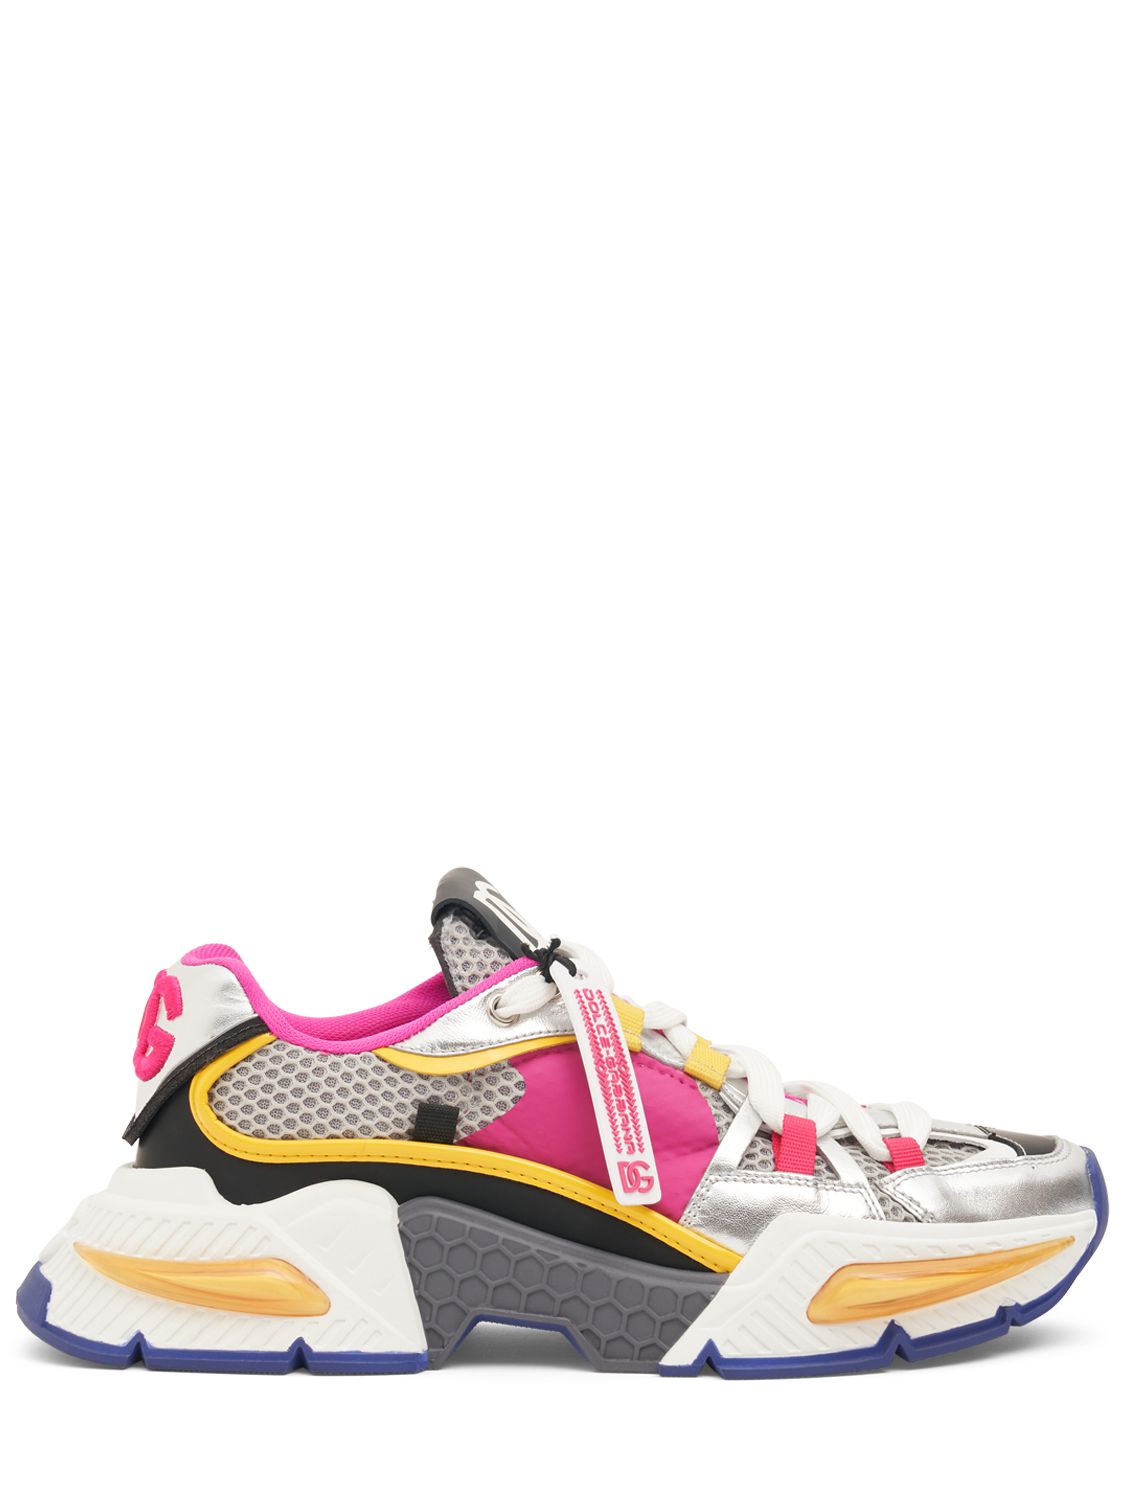 Dolce & Gabbana Air Master Mesh & Leather Trainers In Fuchsia,yellow